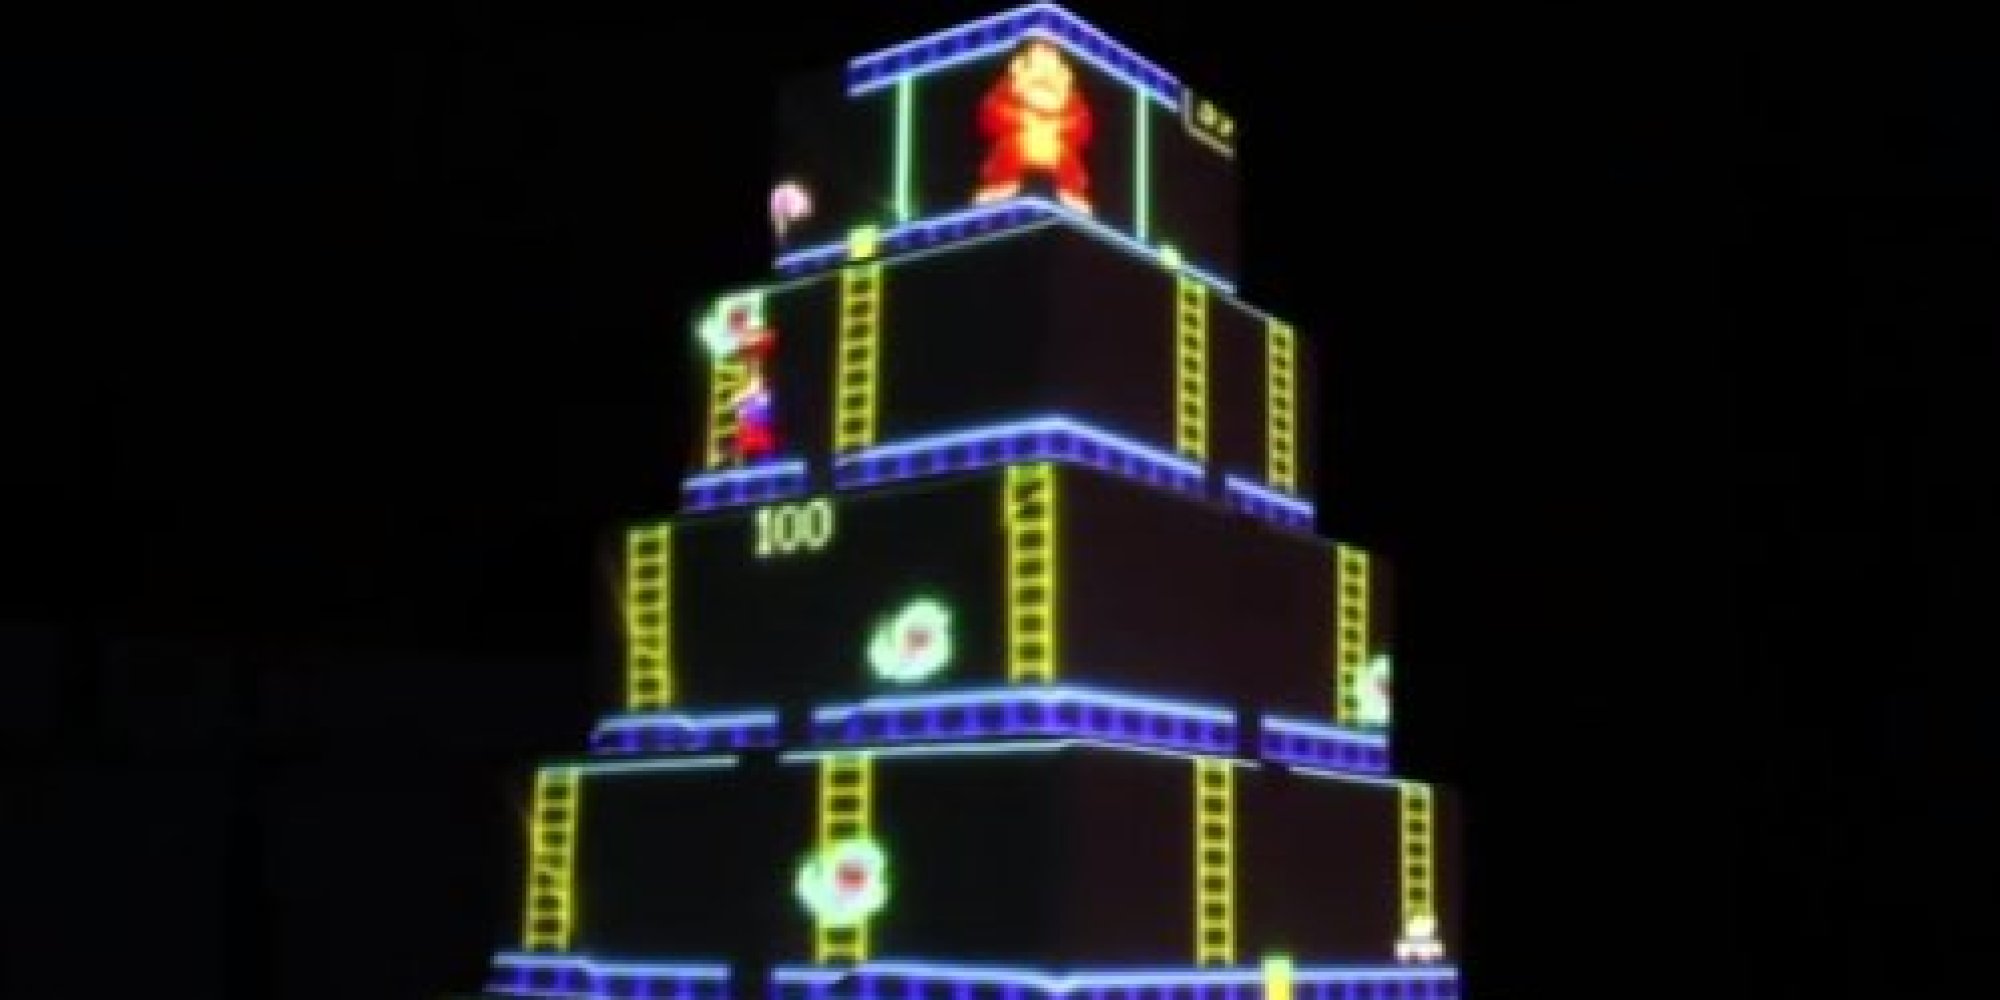 Video Game Wedding Cake Gives Us A Legitimate Reason To